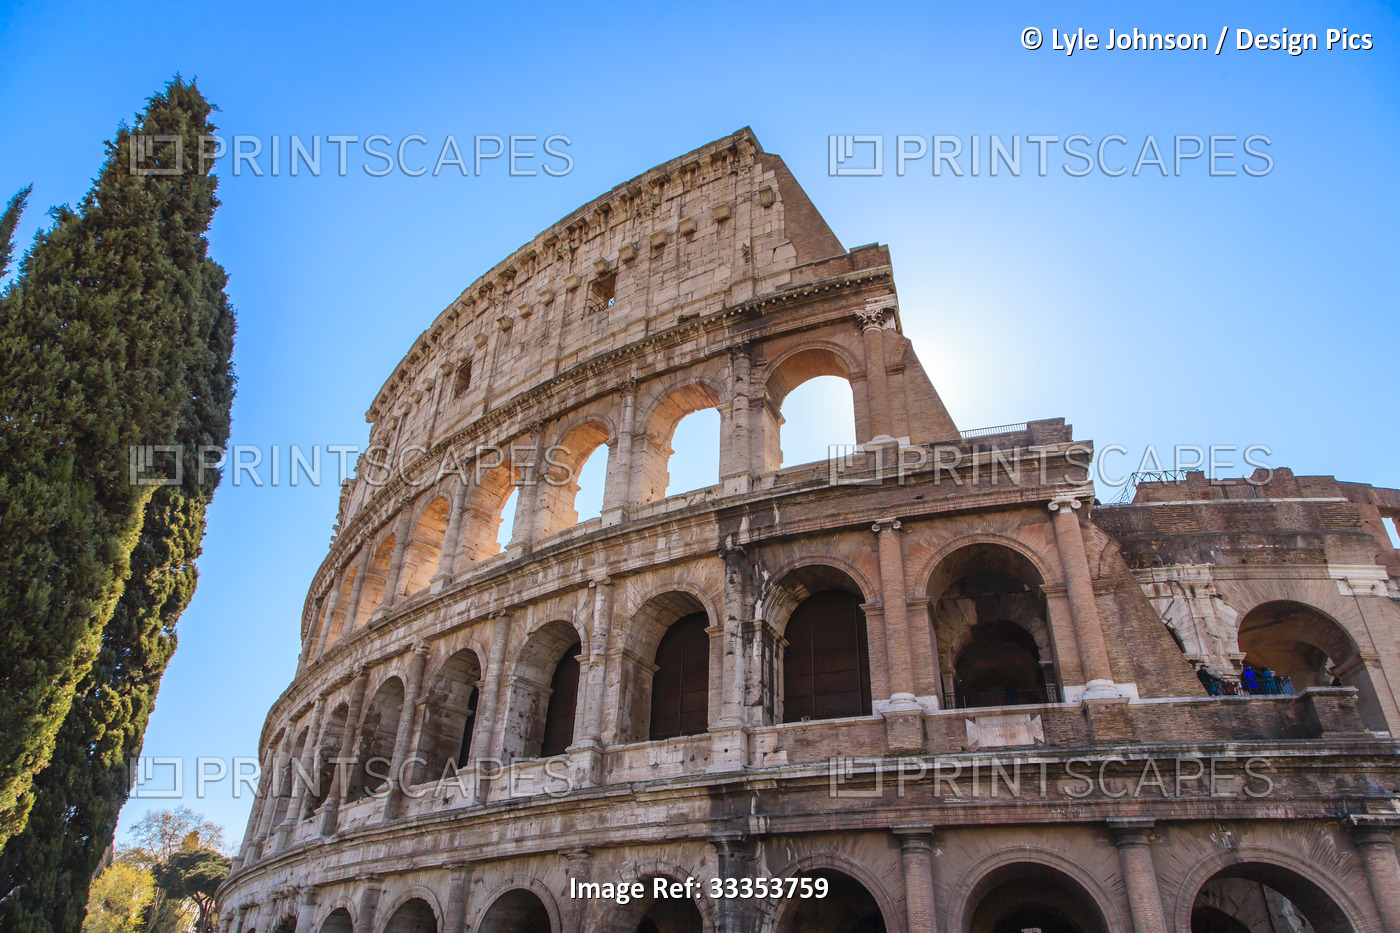 Close-up view of the iconic Colosseum against a blue sky; Rome, Lazio, Italy